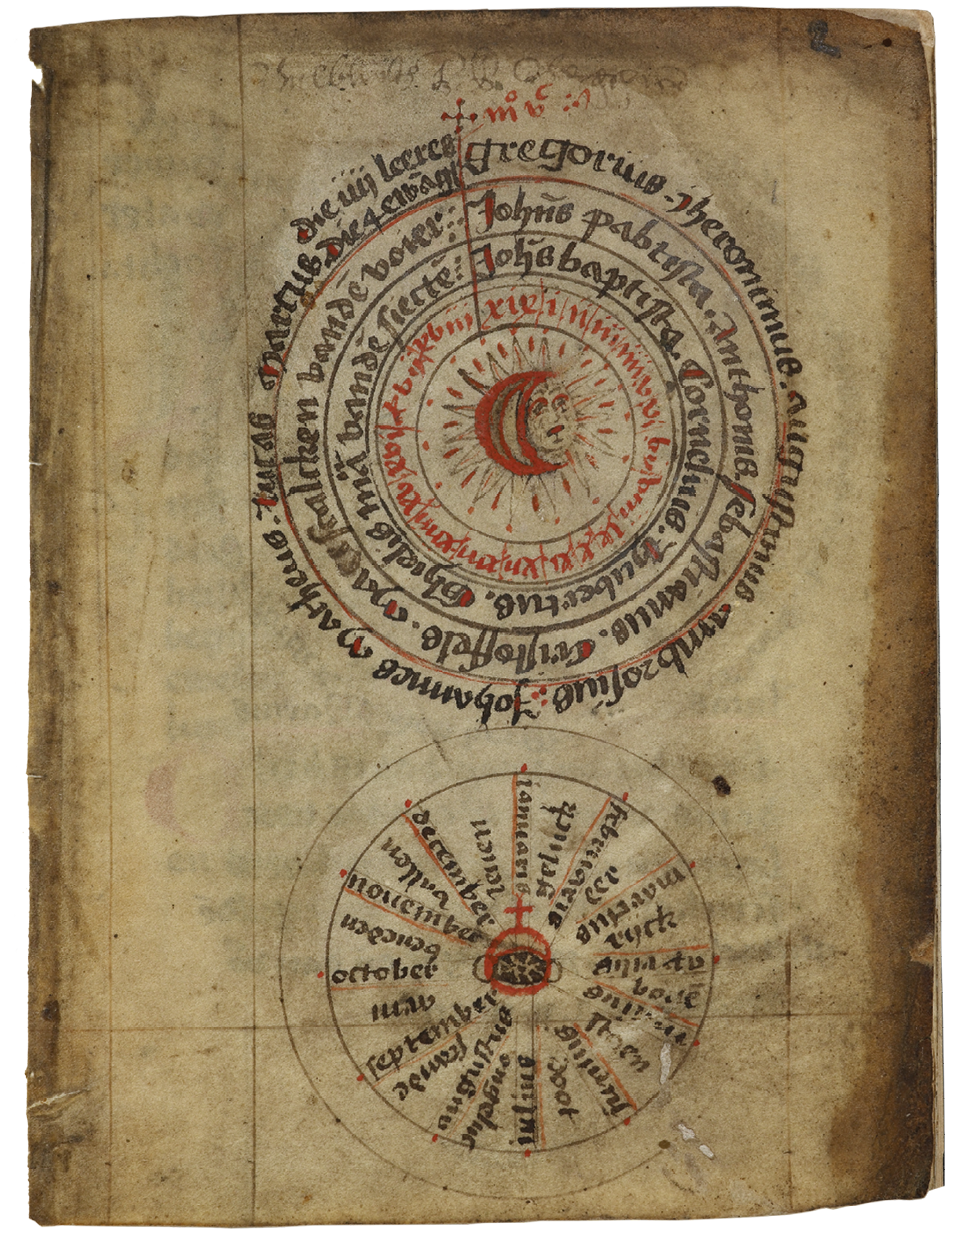 Fig. 43  Unfoliated front matter, formerly belonging to the beghards’ manuscript. London, British Library, Add. Ms. 41338, fol. 2r.